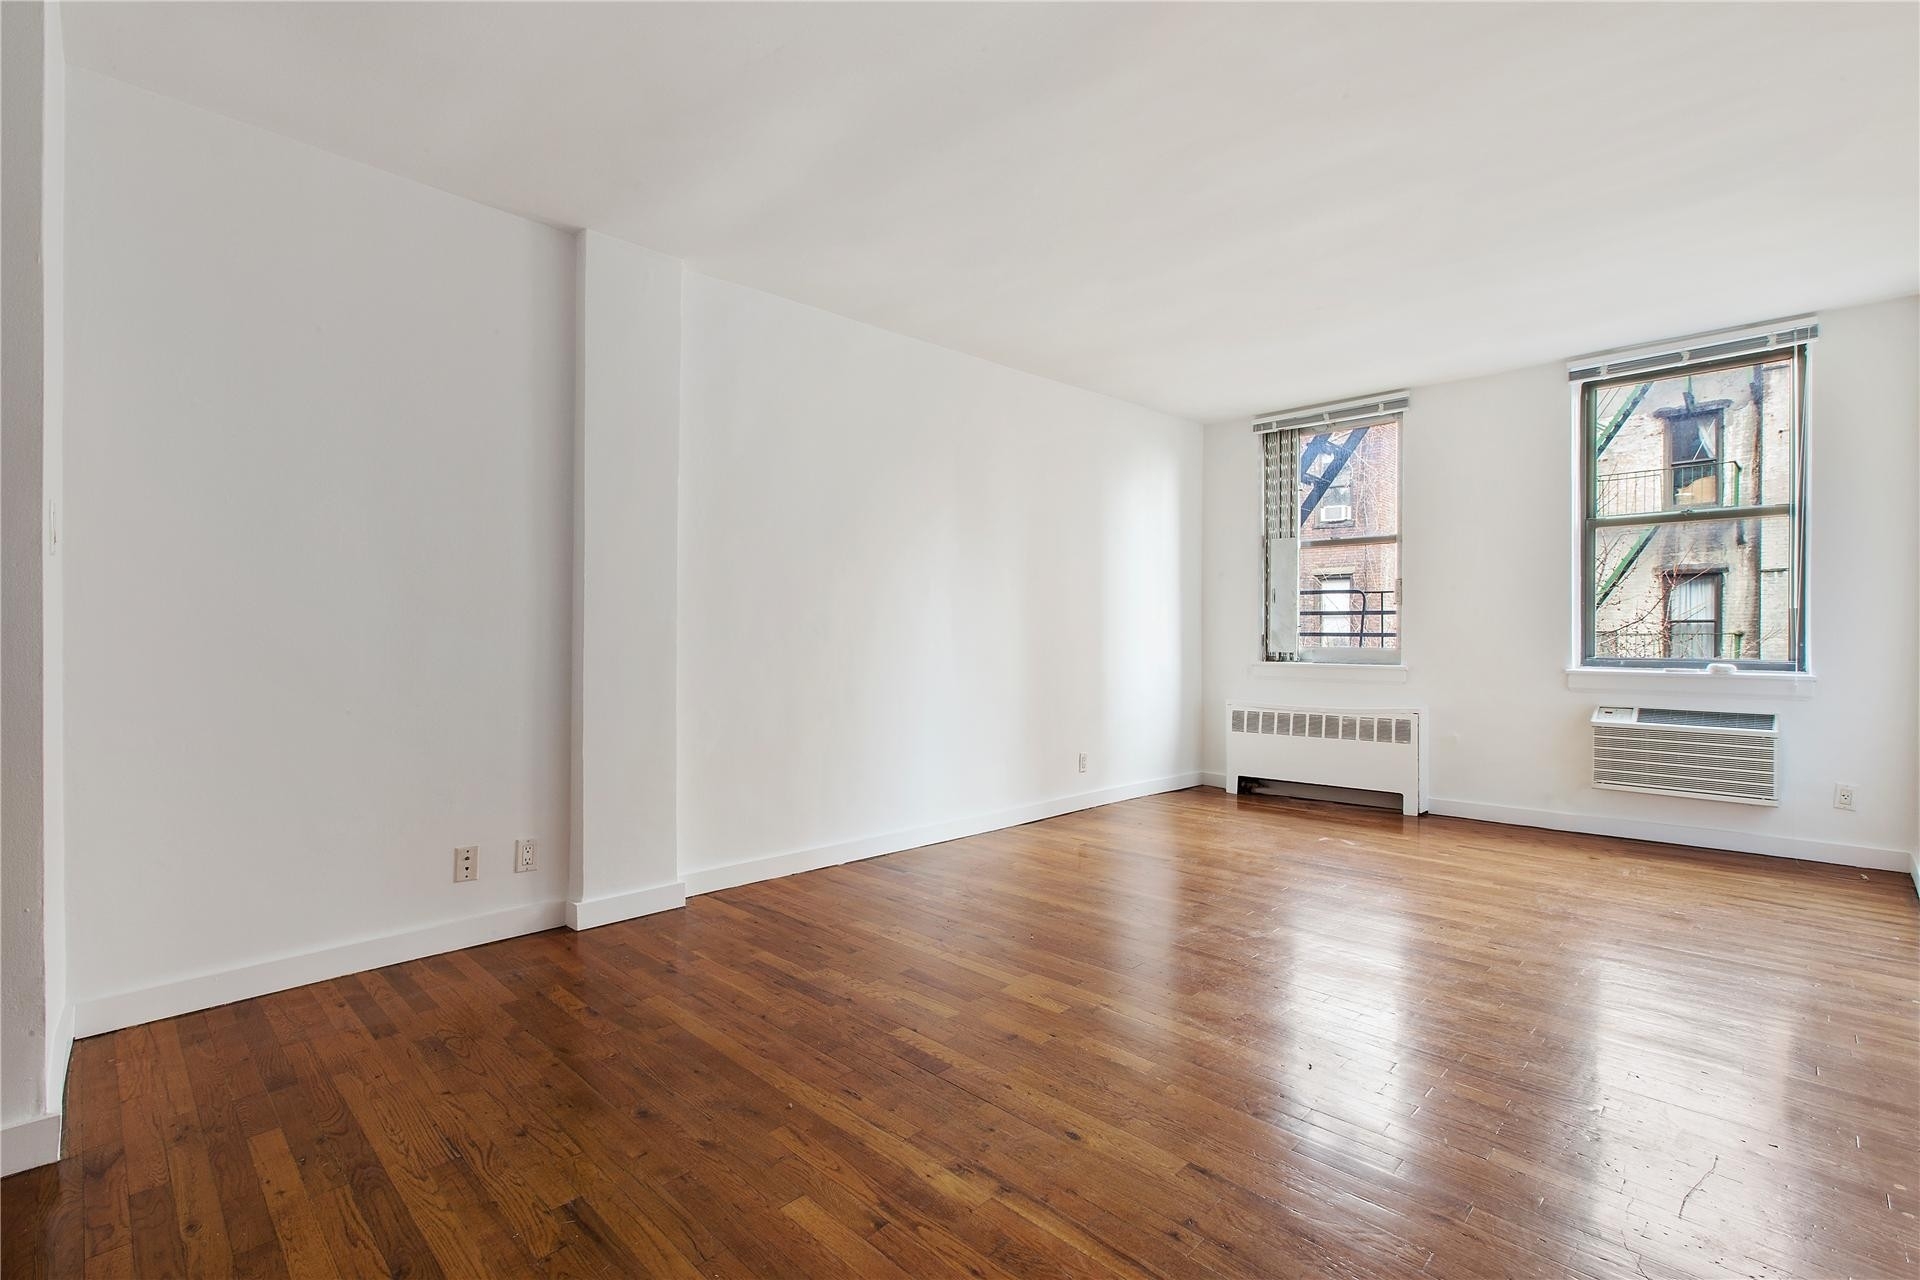 Property at 235 East 80th St, 5E New York